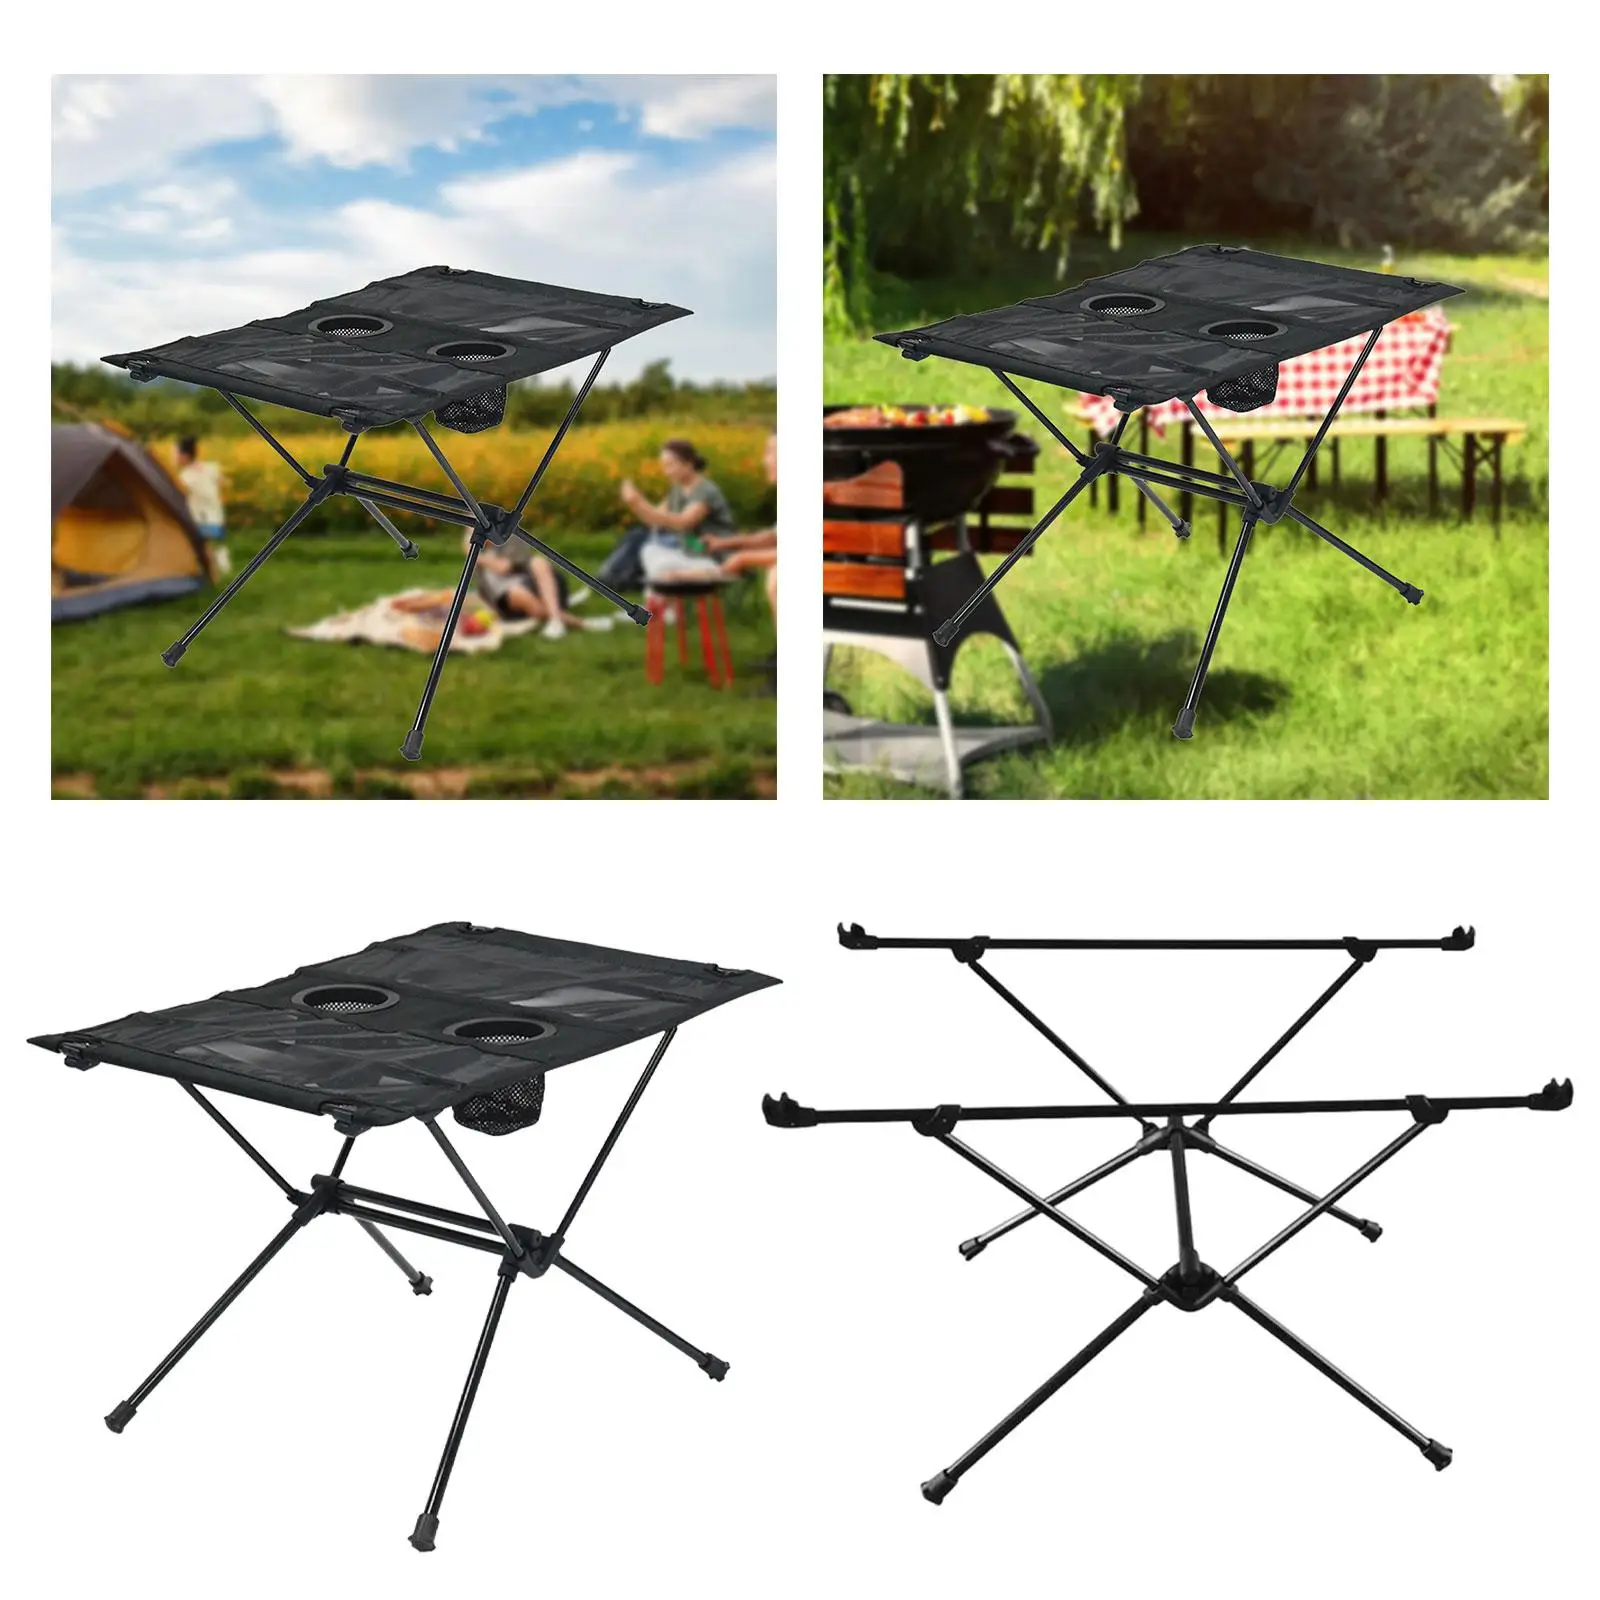 Folding Camping Table Portable Desk Detachable Retractable with Storage Mesh with 2 Cup Holes Aluminum Alloy for Fishing Garden